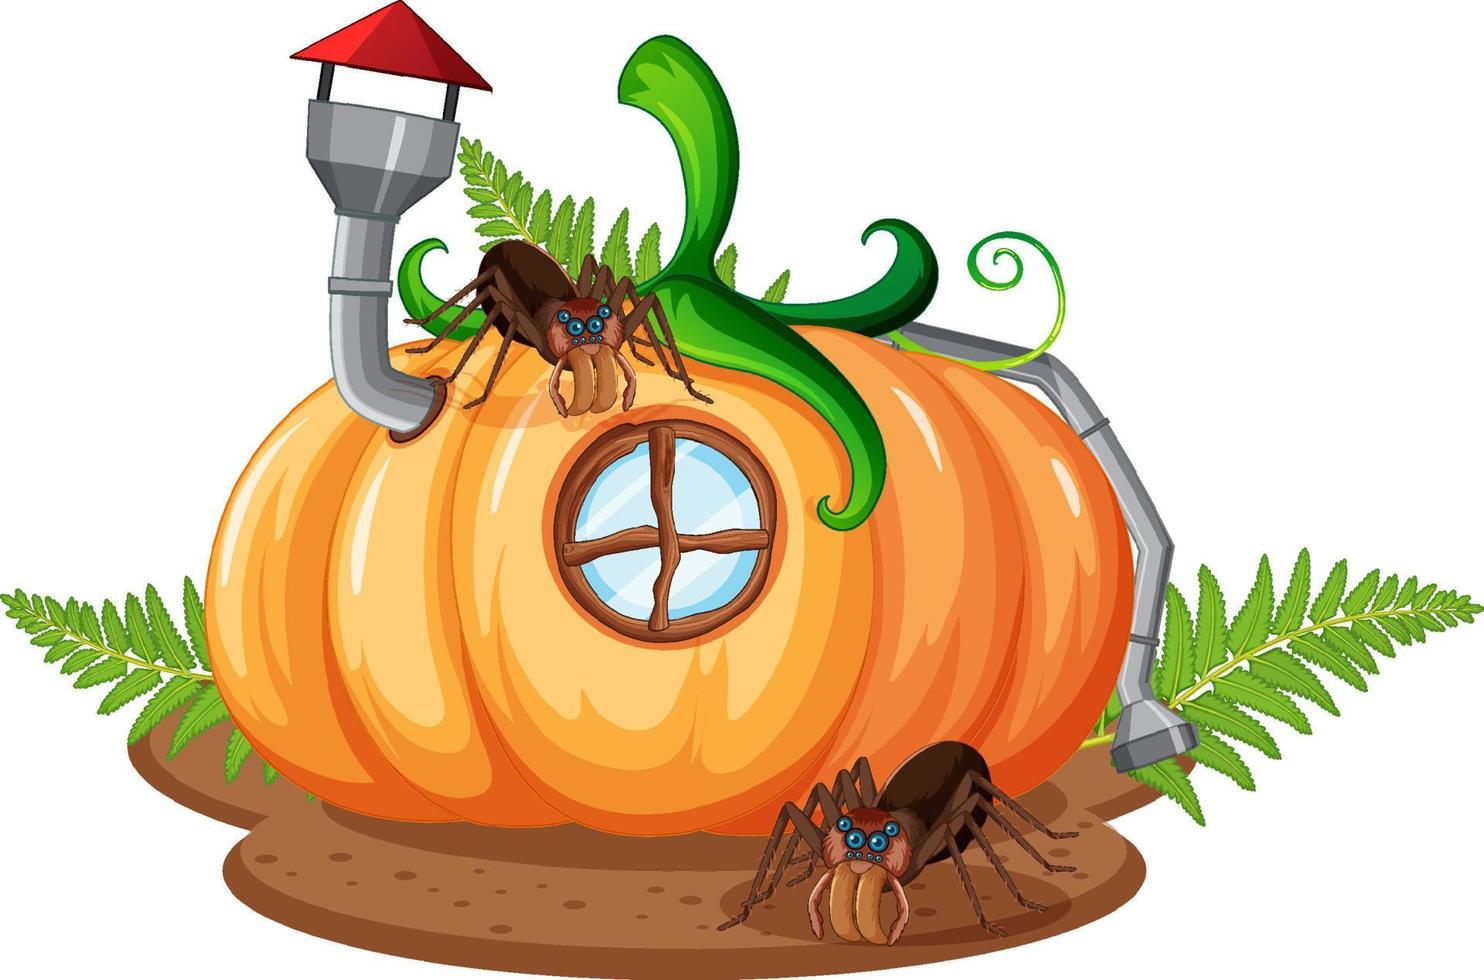 Insect cartoon character at fairy house vector